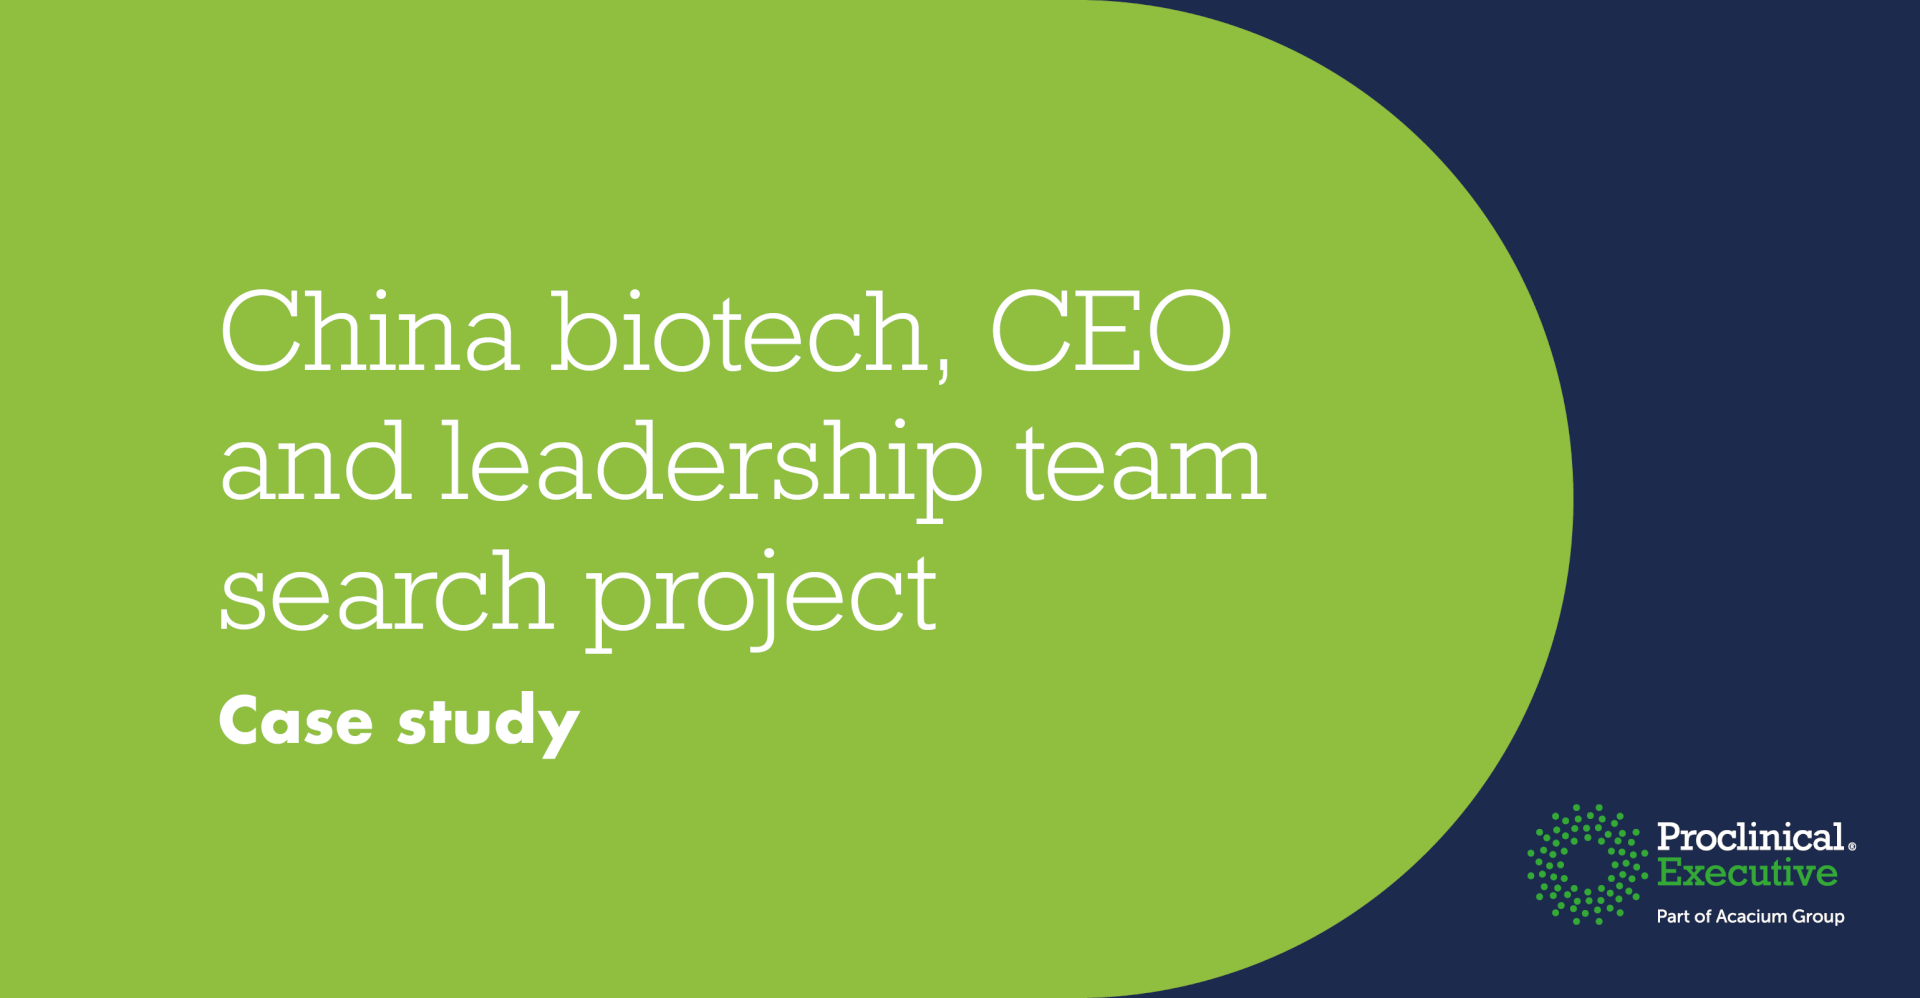 China biotech, CEO and leadership team search project